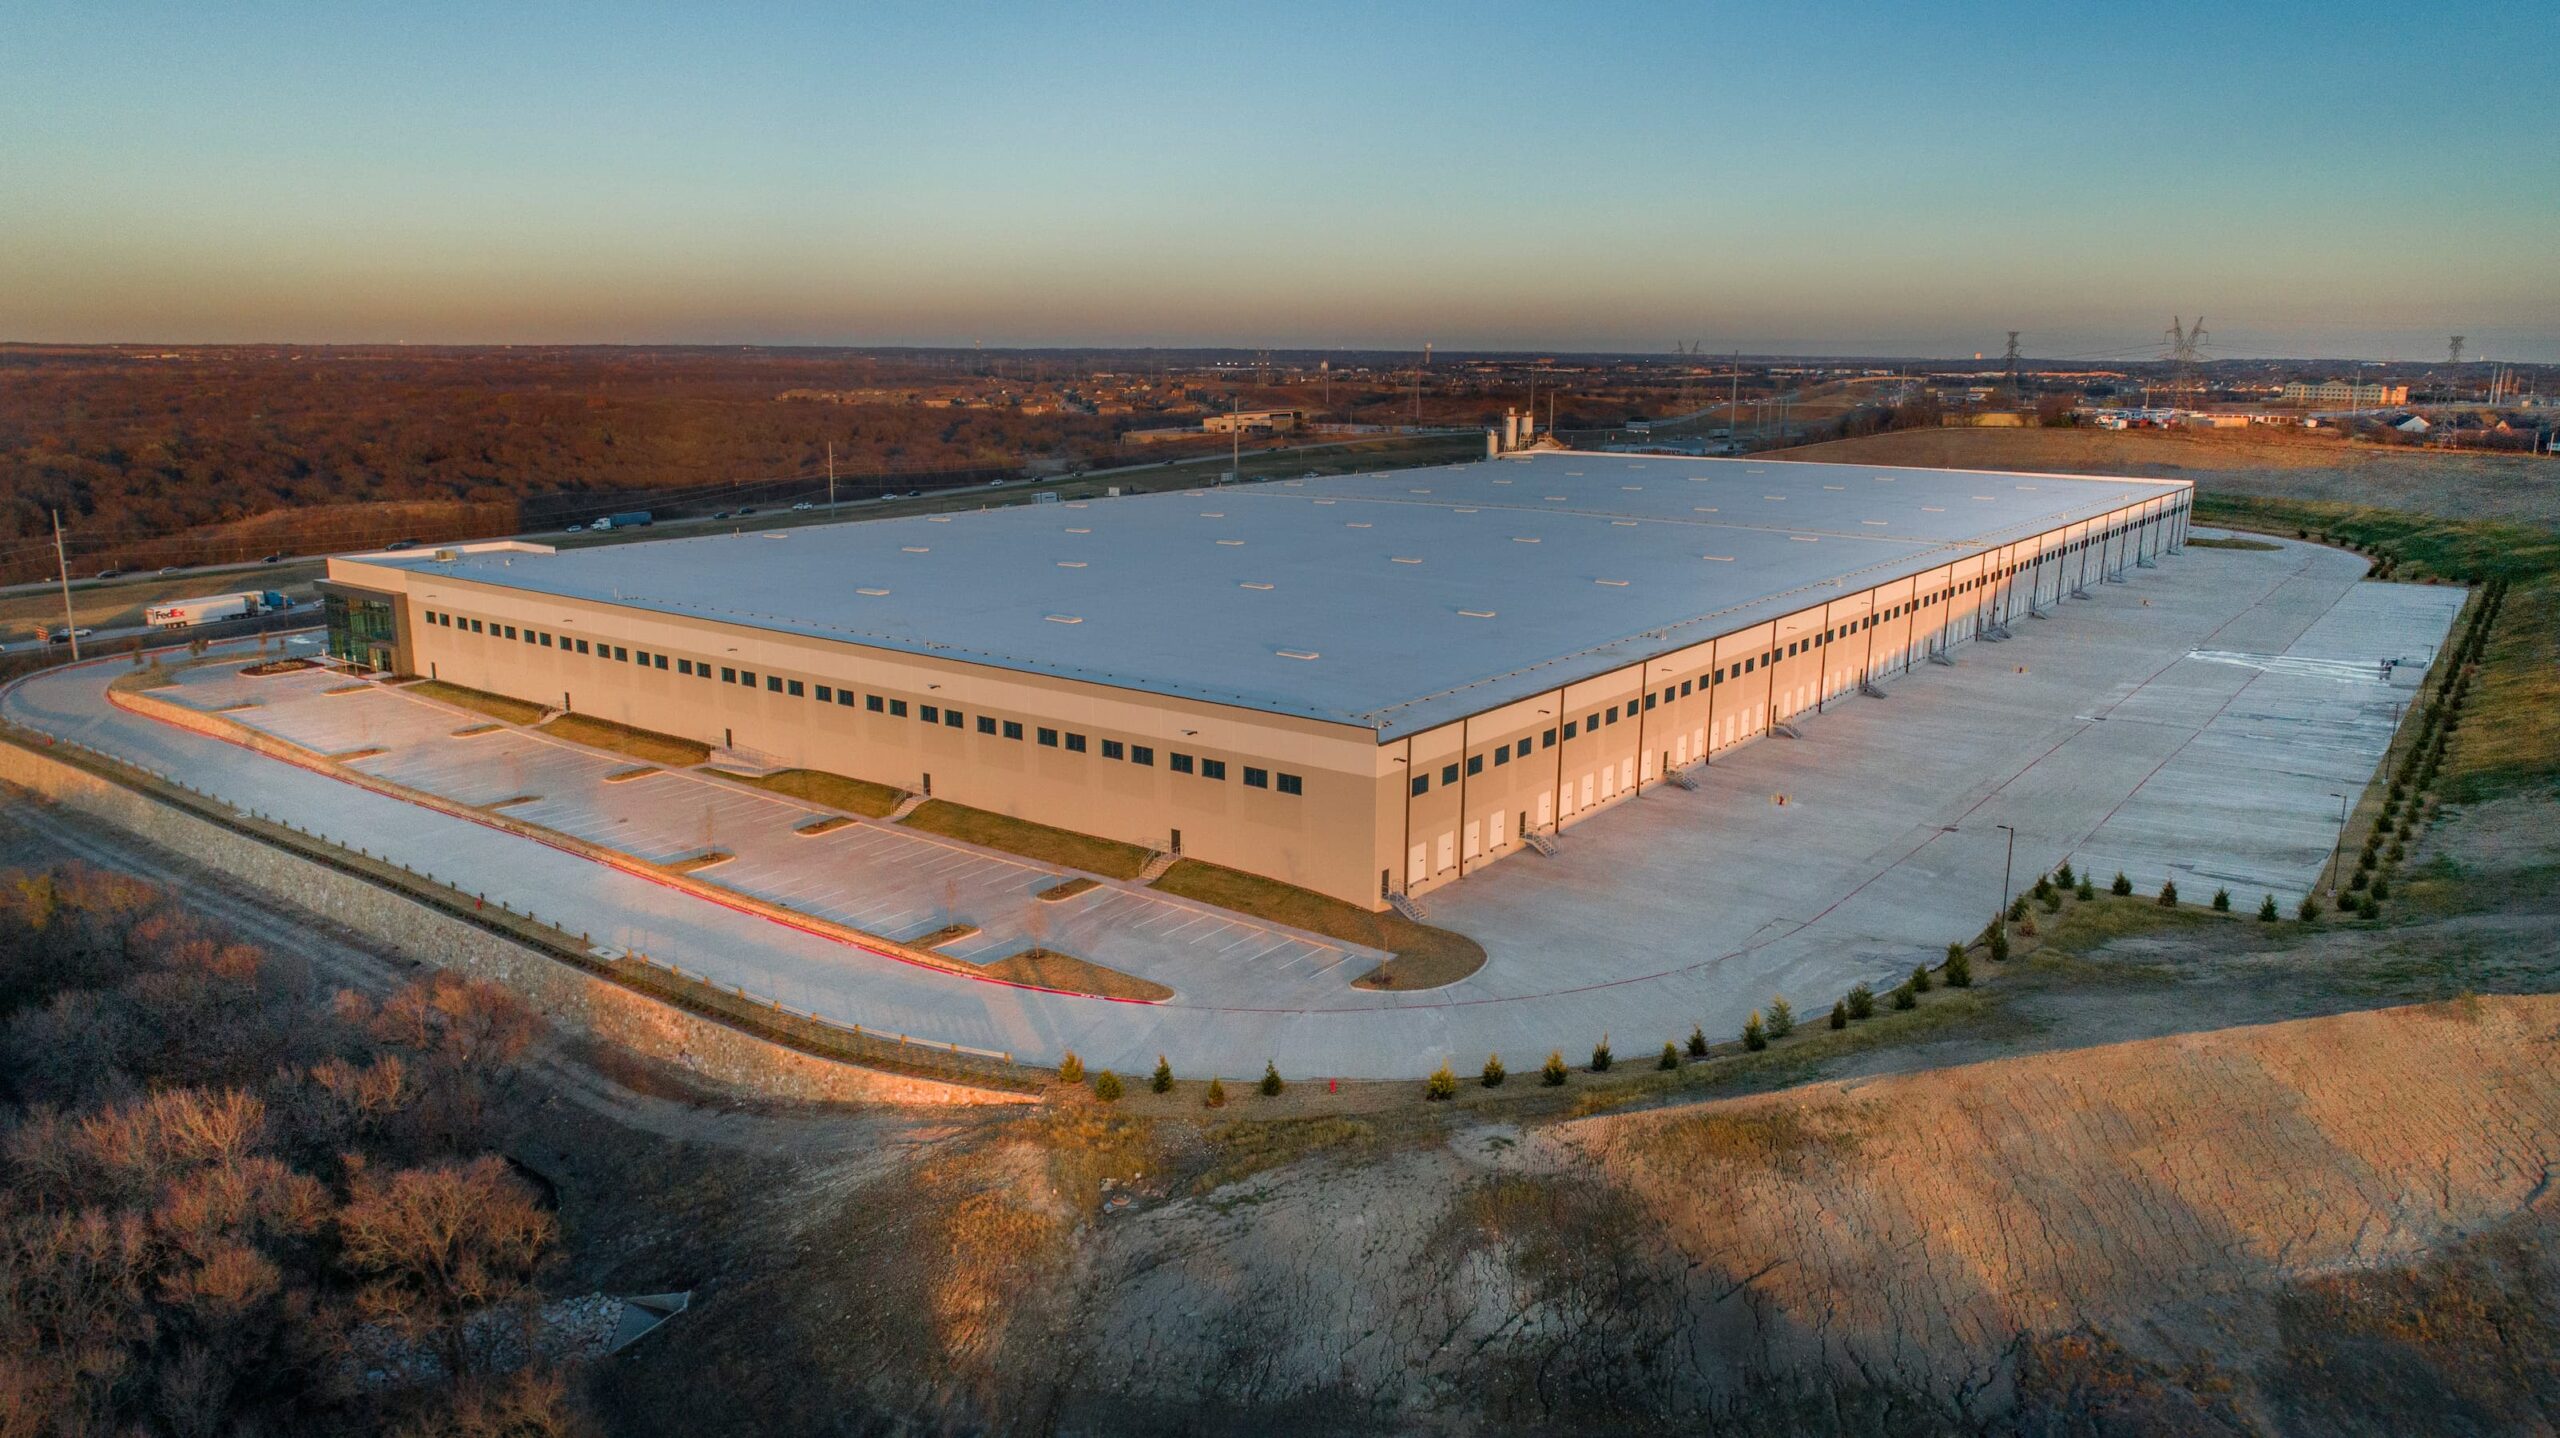 Aerial view of a large industrial warehouse at dusk with surrounding parking, access roads, and nearby new home communities in Mansfield TX.